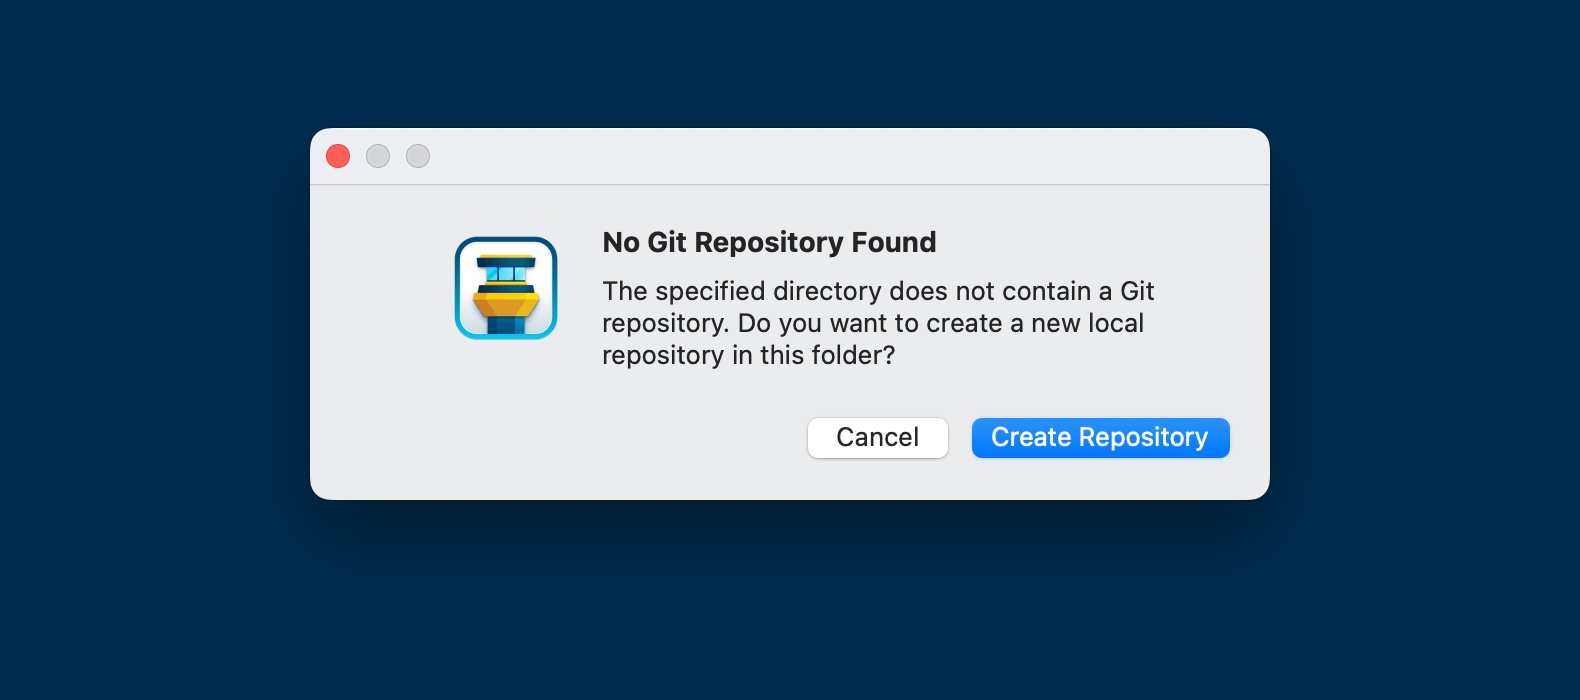 Tower — No Git Repository Found